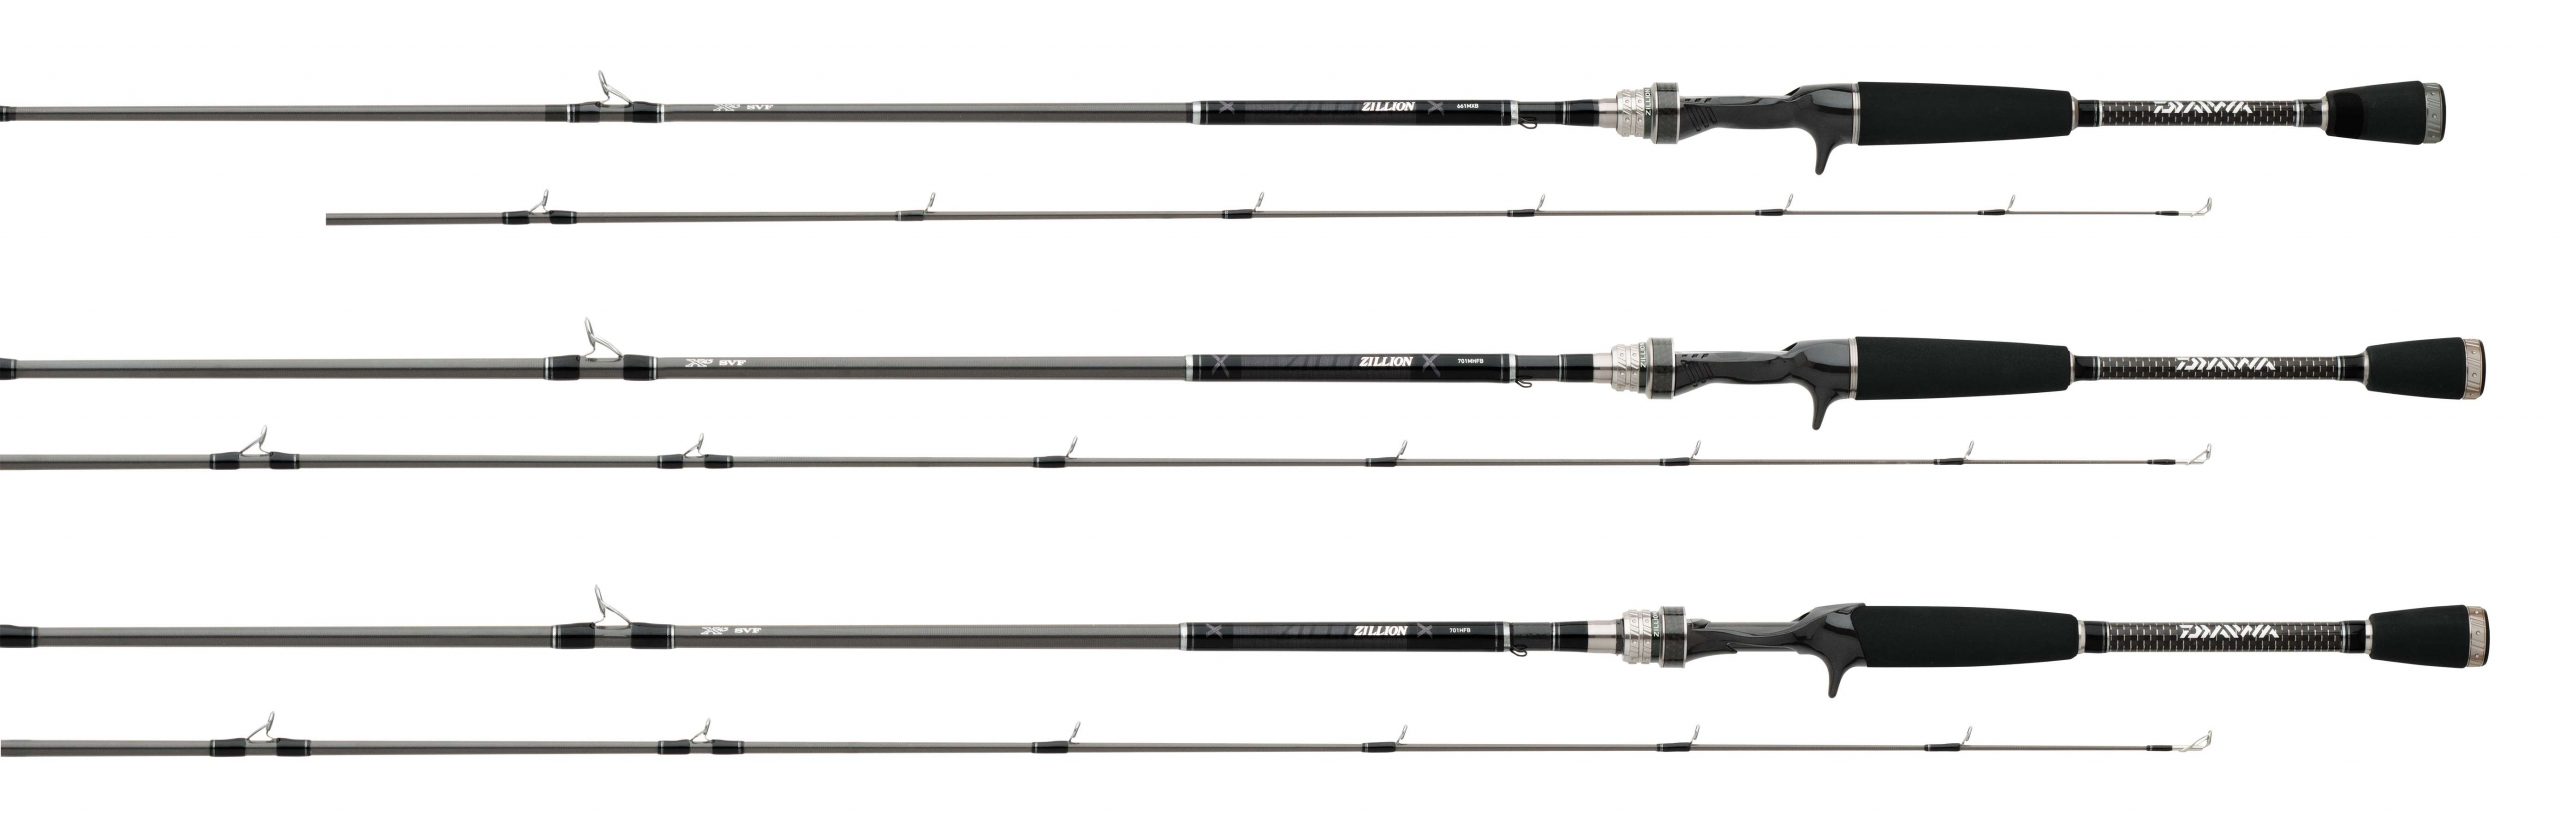 <b>Daiwa</b><br>	Zillion Rods<br>			New ZILLION rods are engineered to offer the durability and performance required for professional-level fishing. Eight new models have been added to the already-opular lineup. Carbon-Air reel seats make the Zillion rods lightweight, and the Tangle Free Fuji SIC Ring K Guides keep line flowing to achieve maximum casting distance. Using SVF graphite and X45 Bias construction, the resulting blanks are exceptionally strong, lightweight and sensitive.